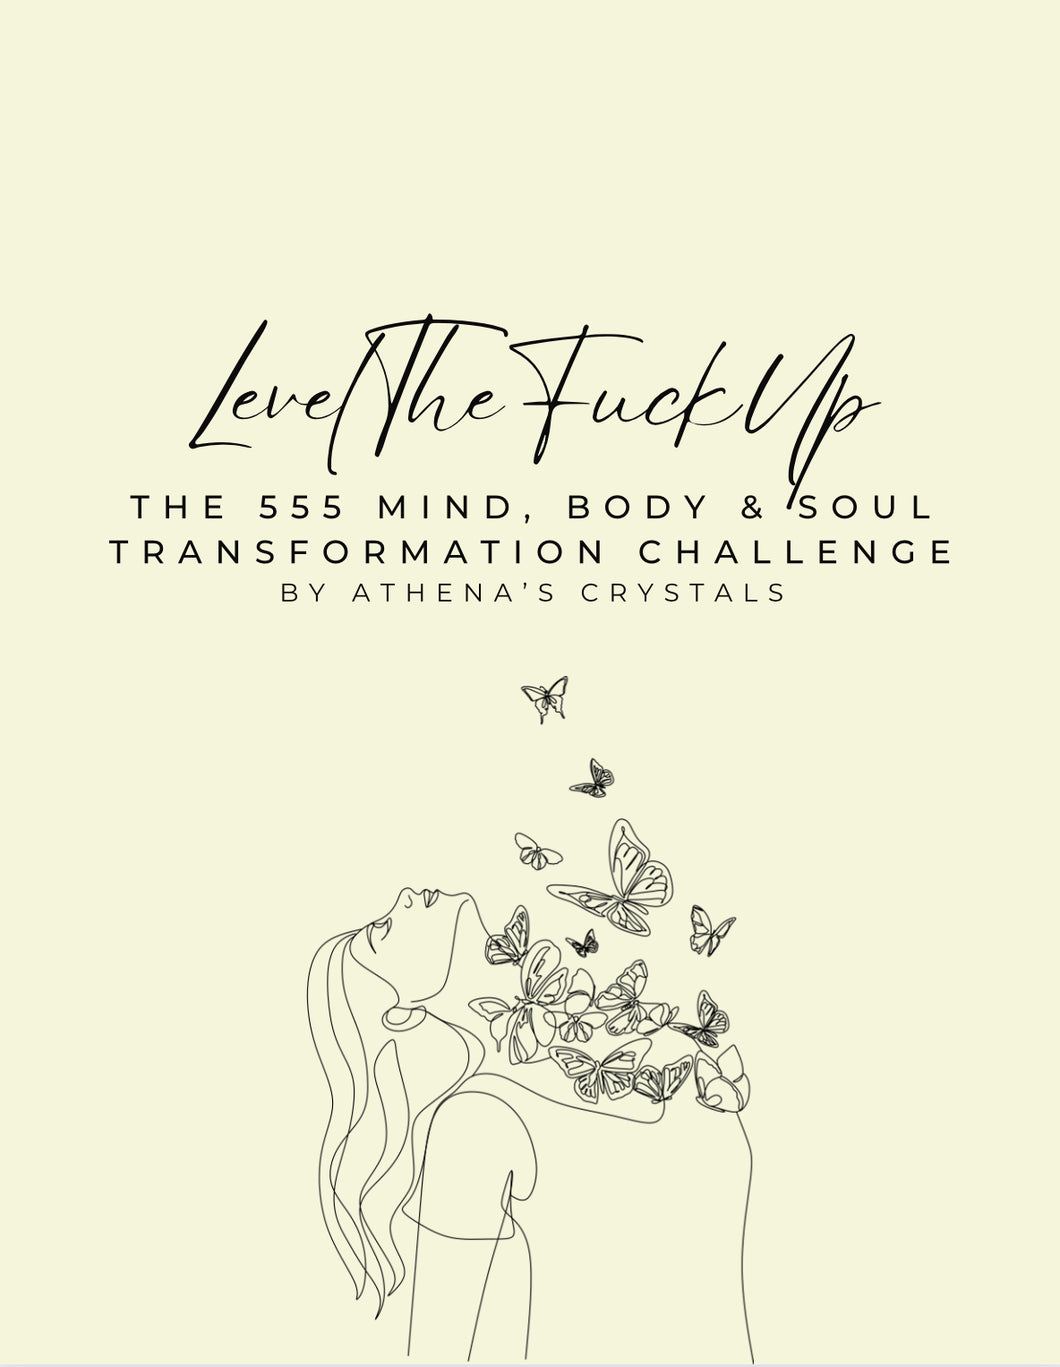 555 level the fuck up- mind, body & soul challenge (download)